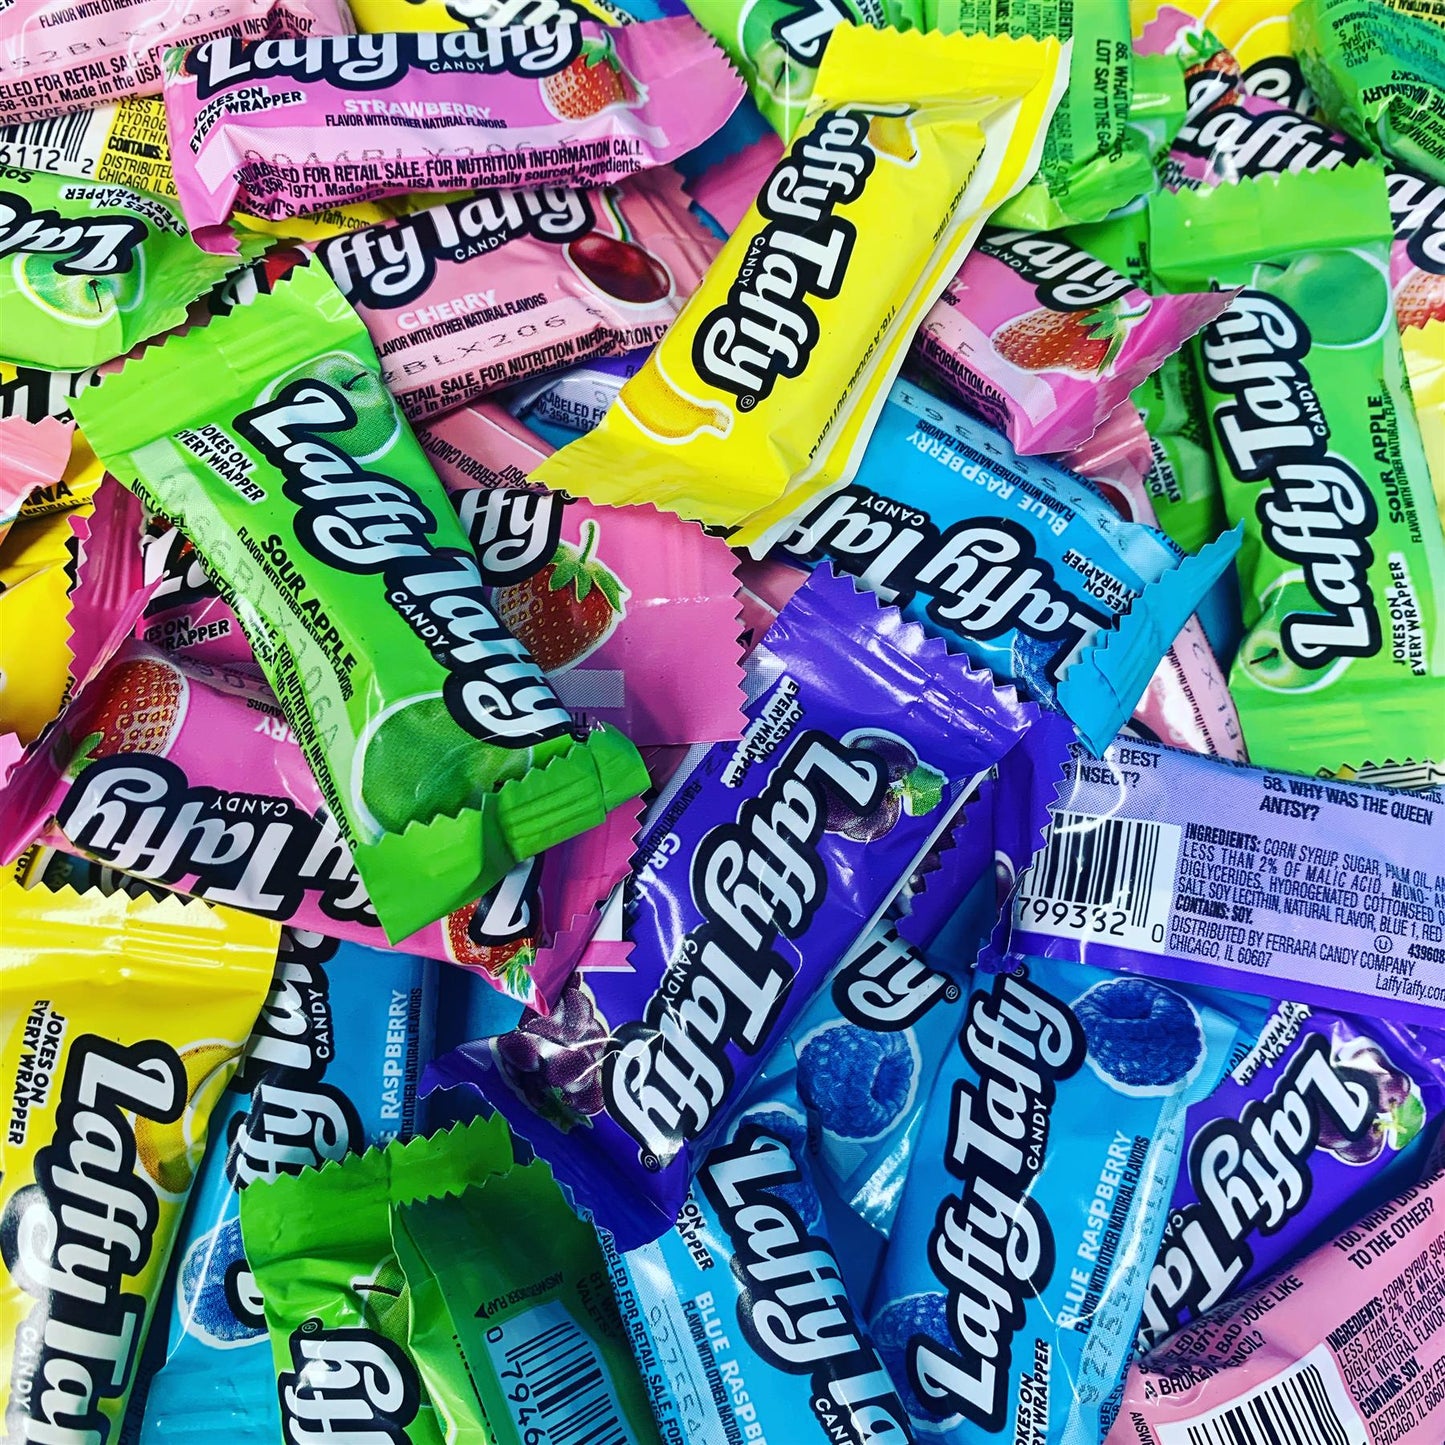 LAFFY TAFFY MIXED APPLE , CHERRY & STRAWBERRY! THESE ARE PAST THE BEST BEFORE DATE!!!